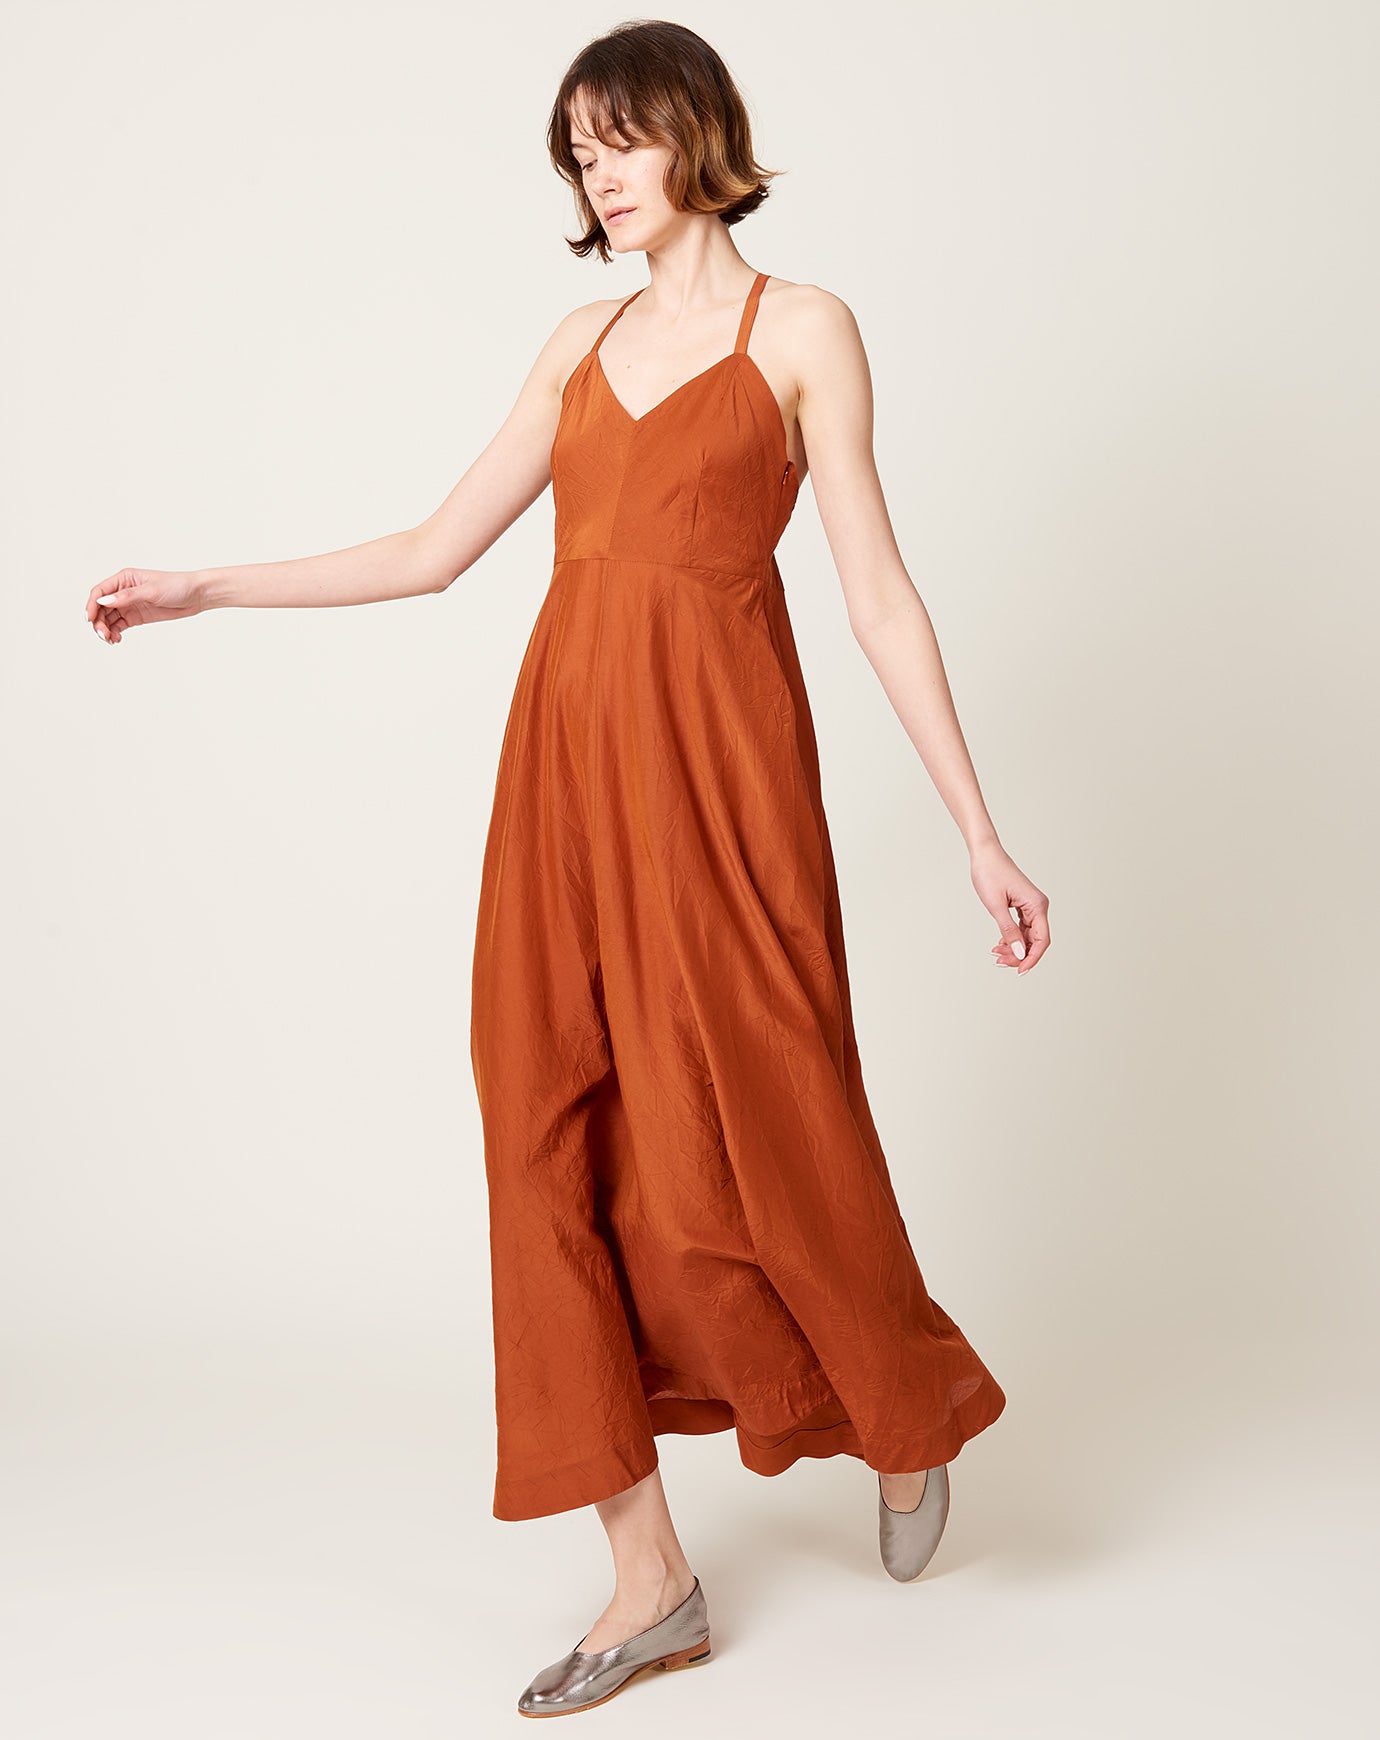 Cawley Argentina Dress in Rust